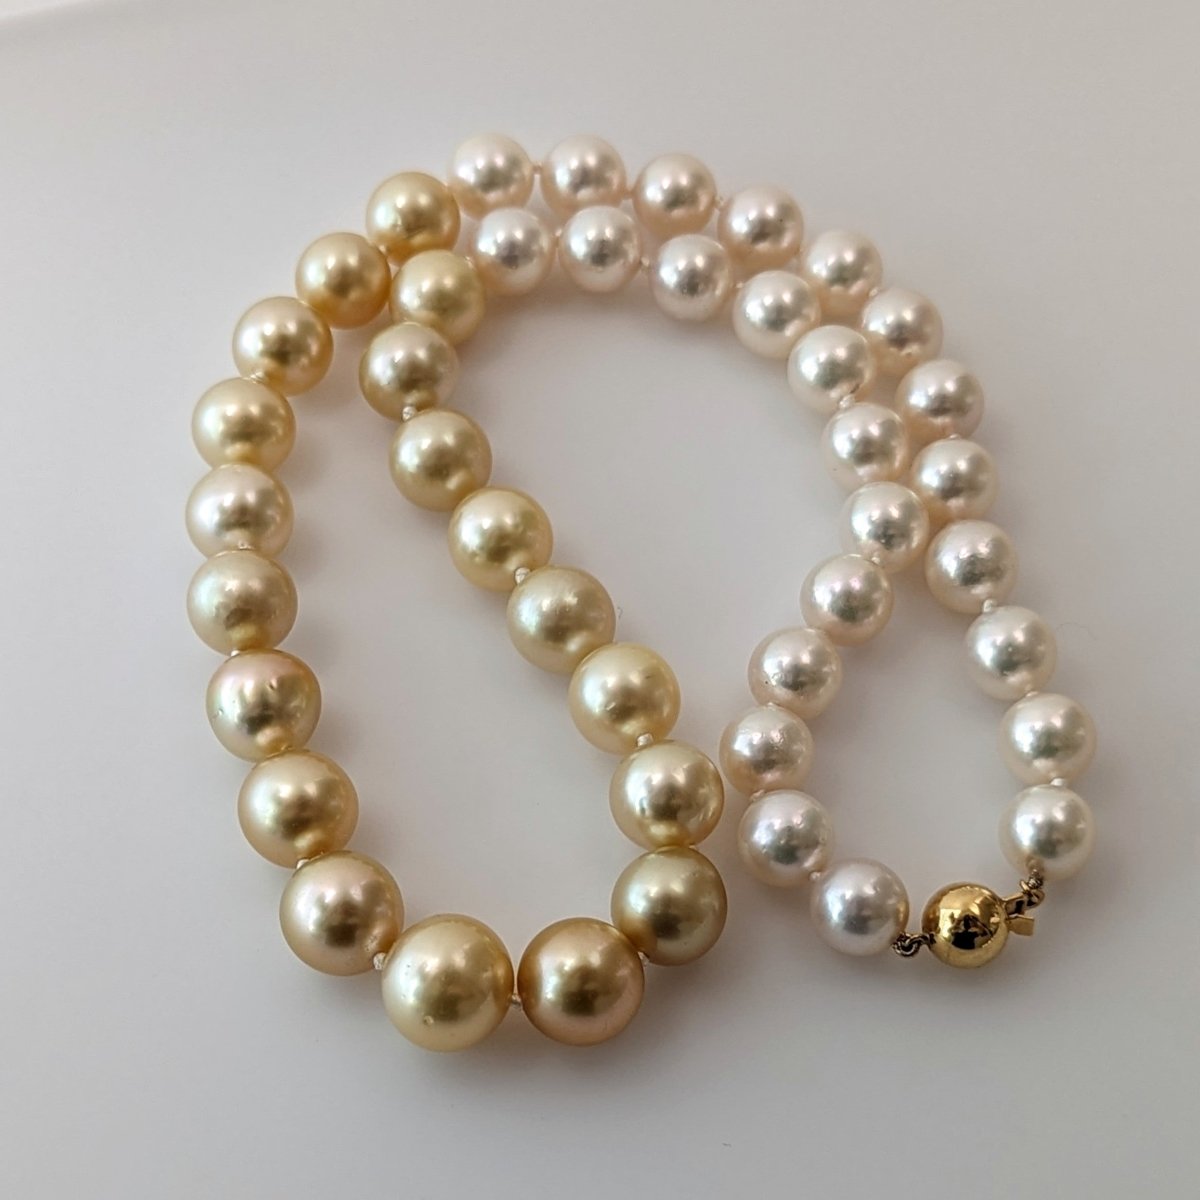 White South Sea Pearl Necklace Strand 12mm-13mm Baroque Pearls Silver Clasp  18